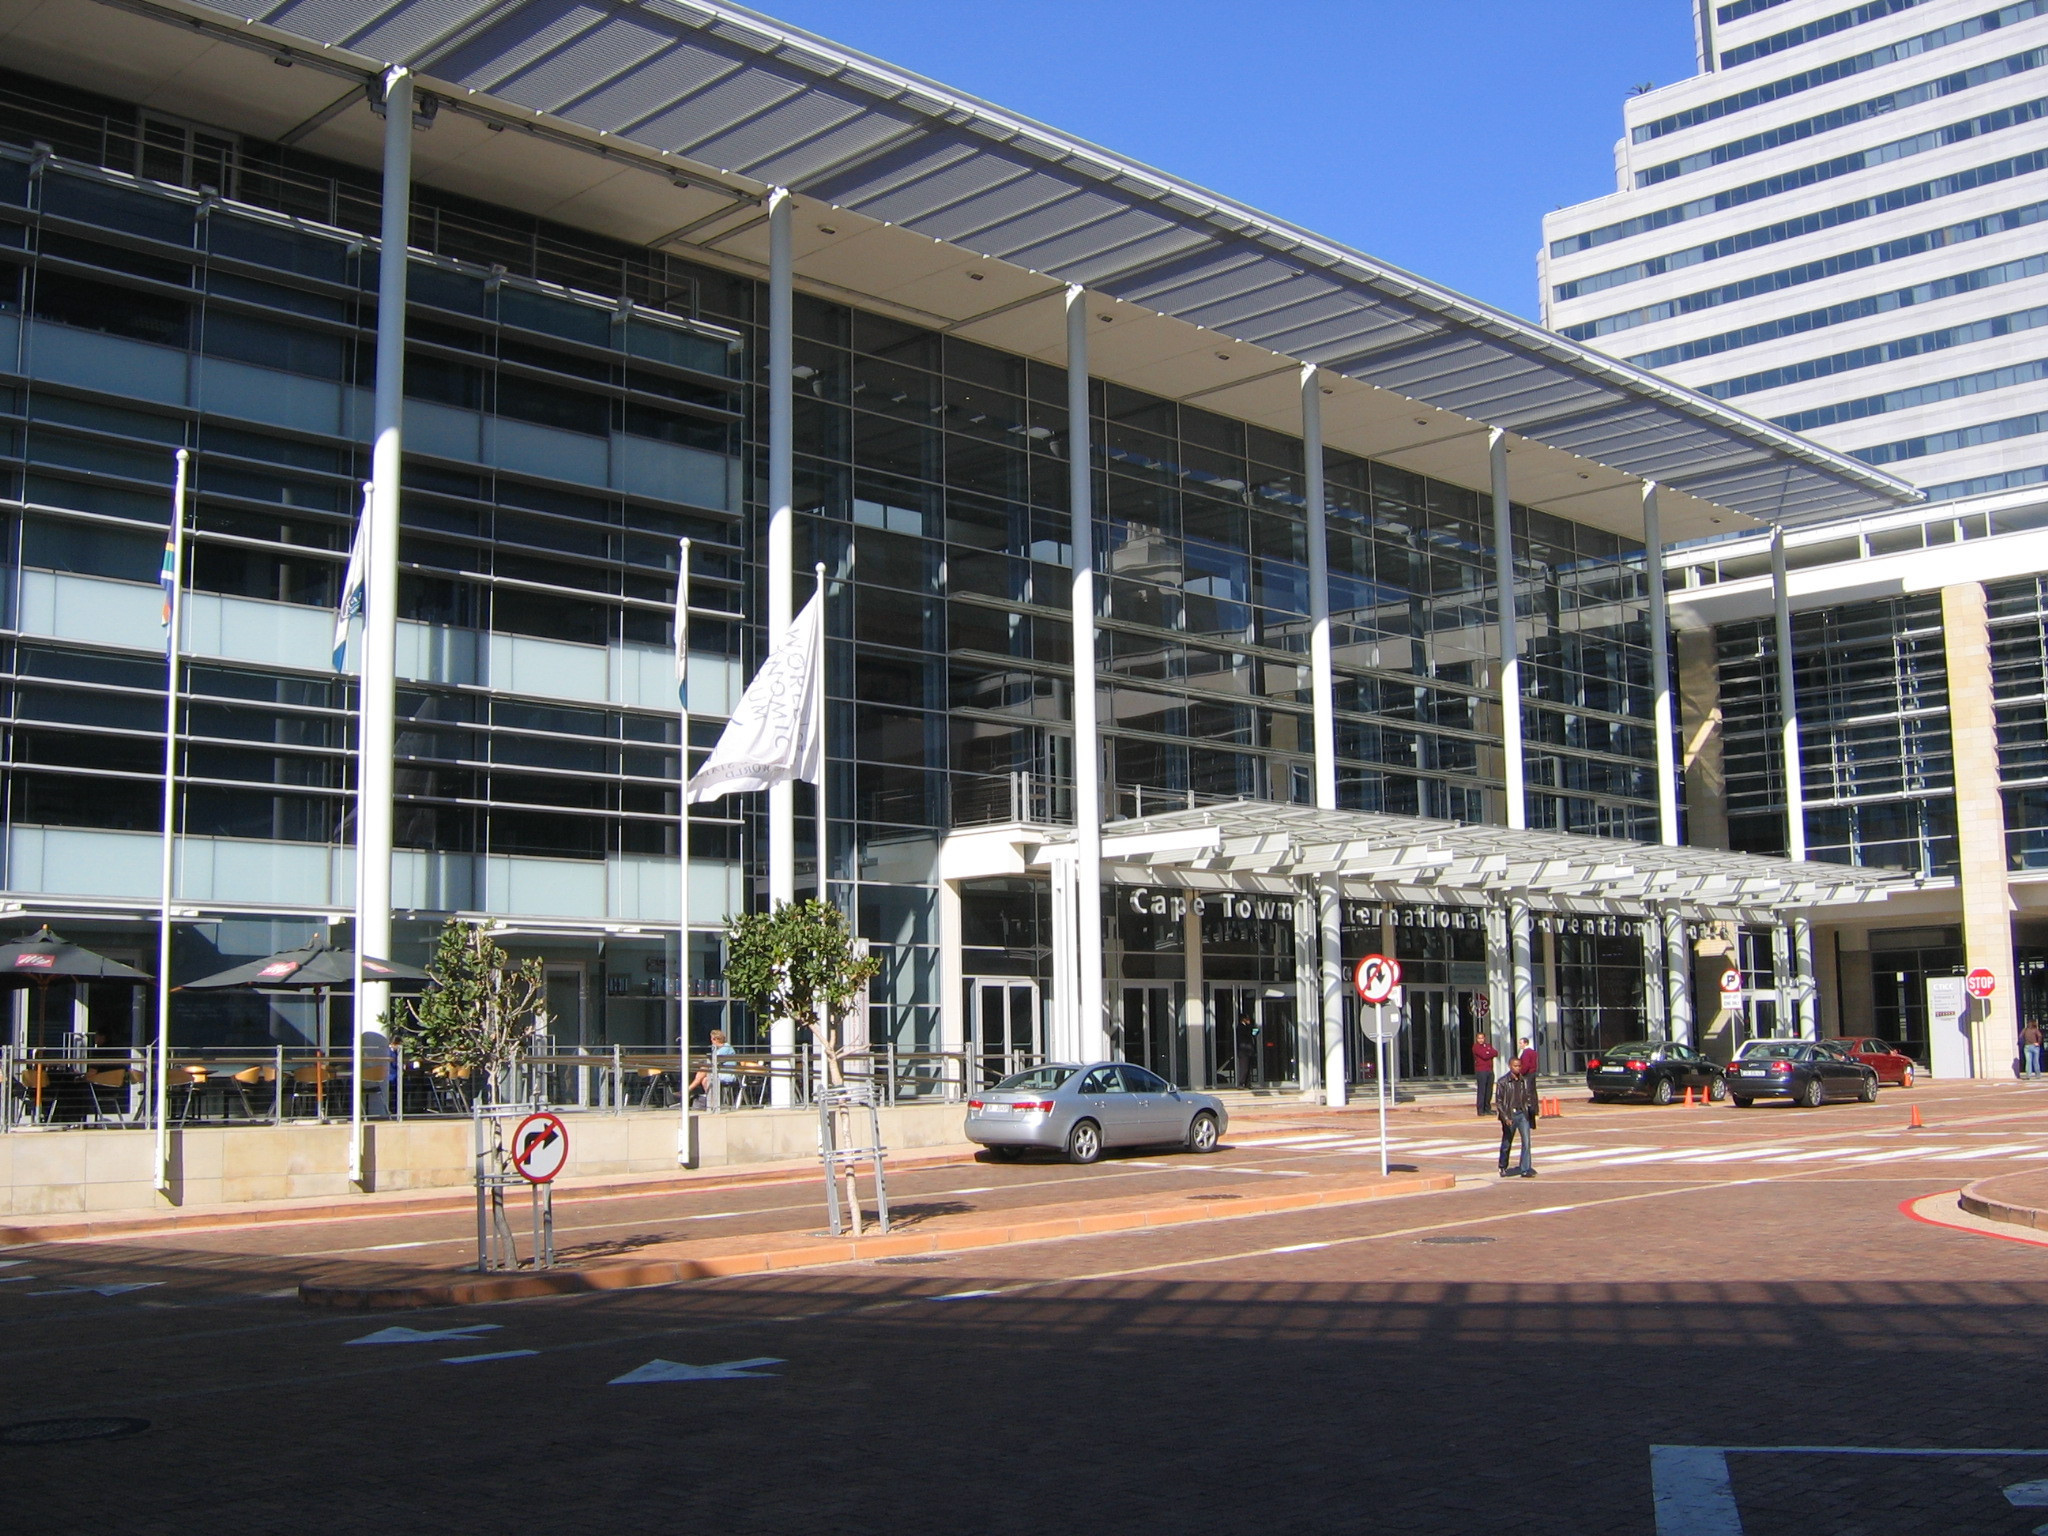 
The Cape Town International Convention Centre has hosted historic sports events, including the draw for the 2010 FIFA World Cup ©CTICC